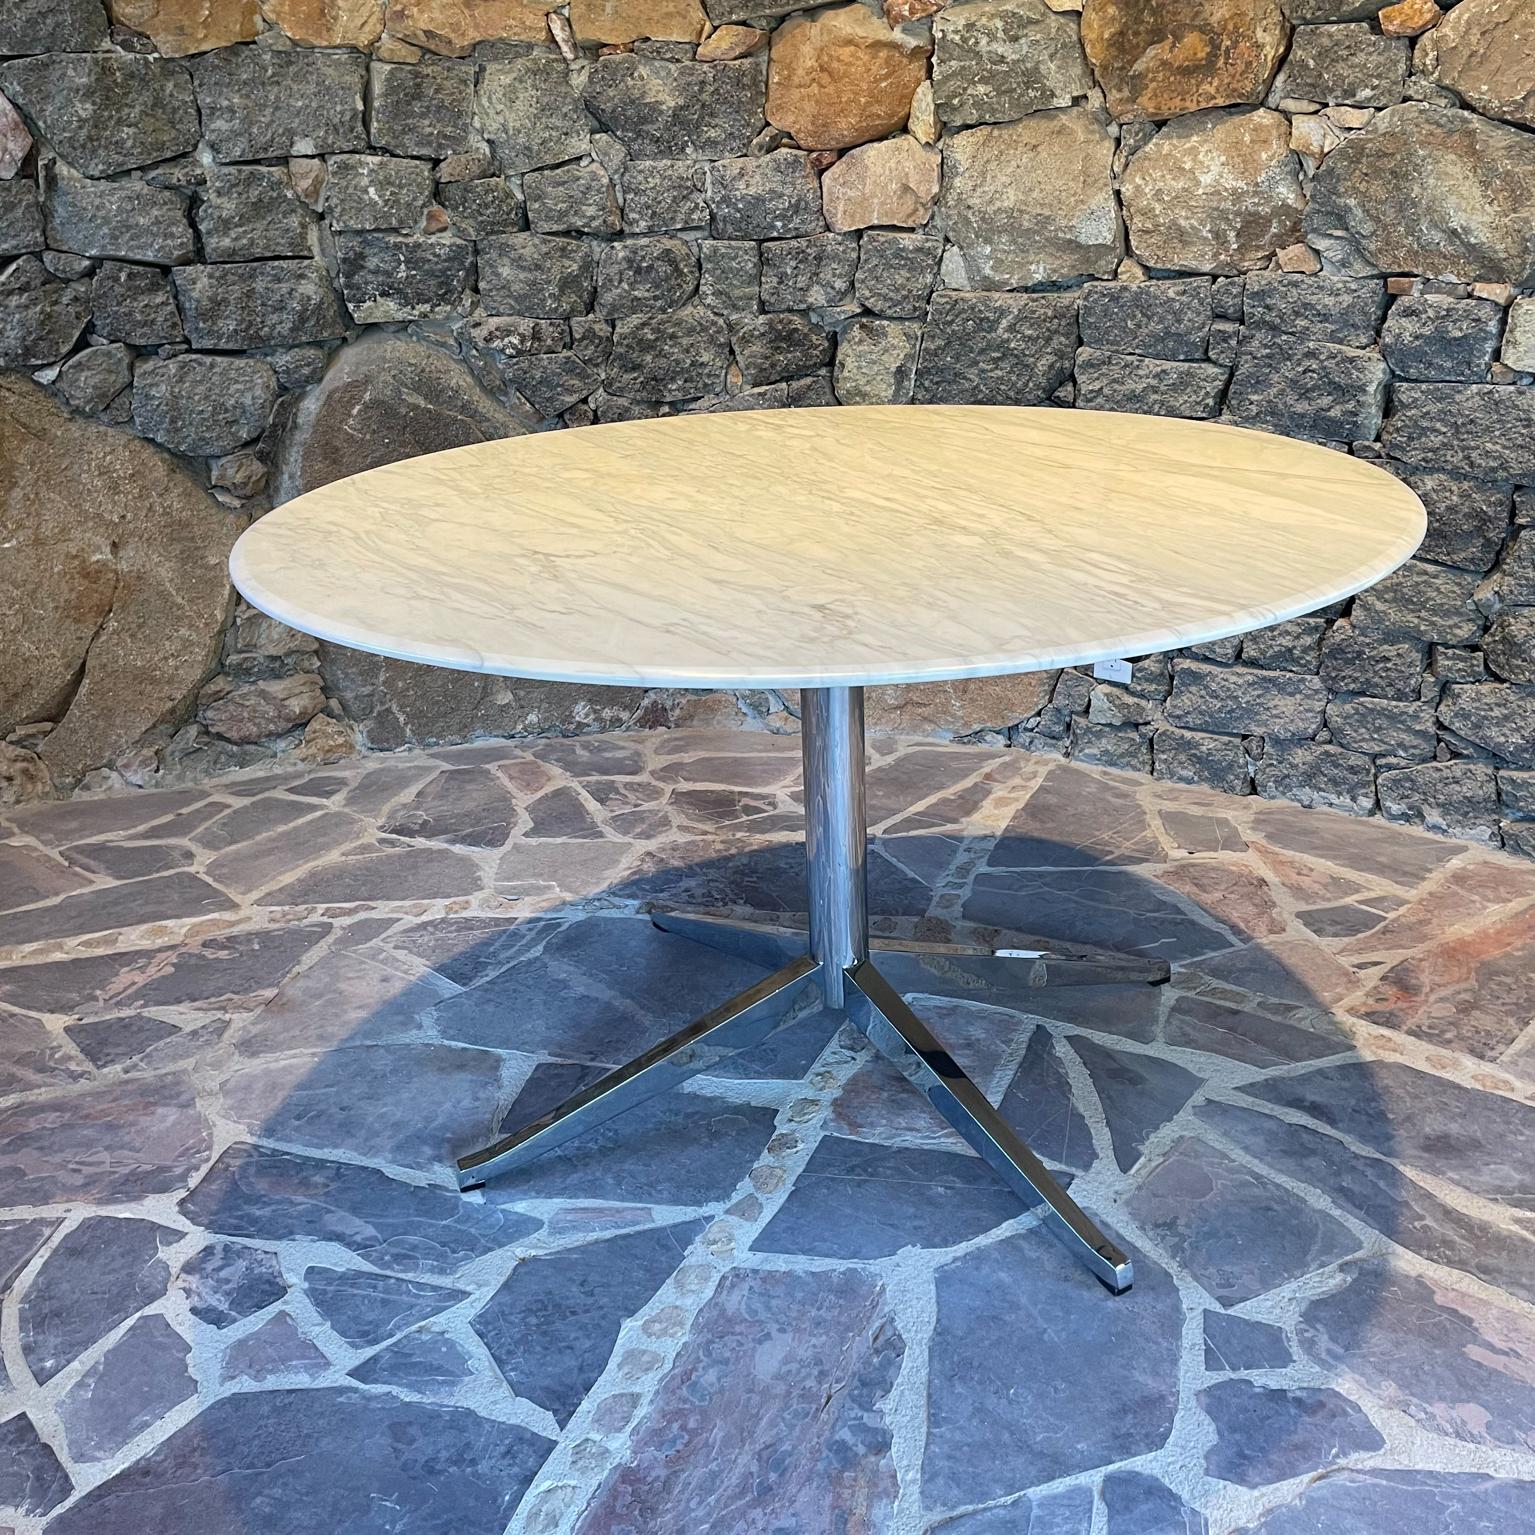 1961 Classic Round Knoll Dining Table Star Chrome Base Restored and Ready 4